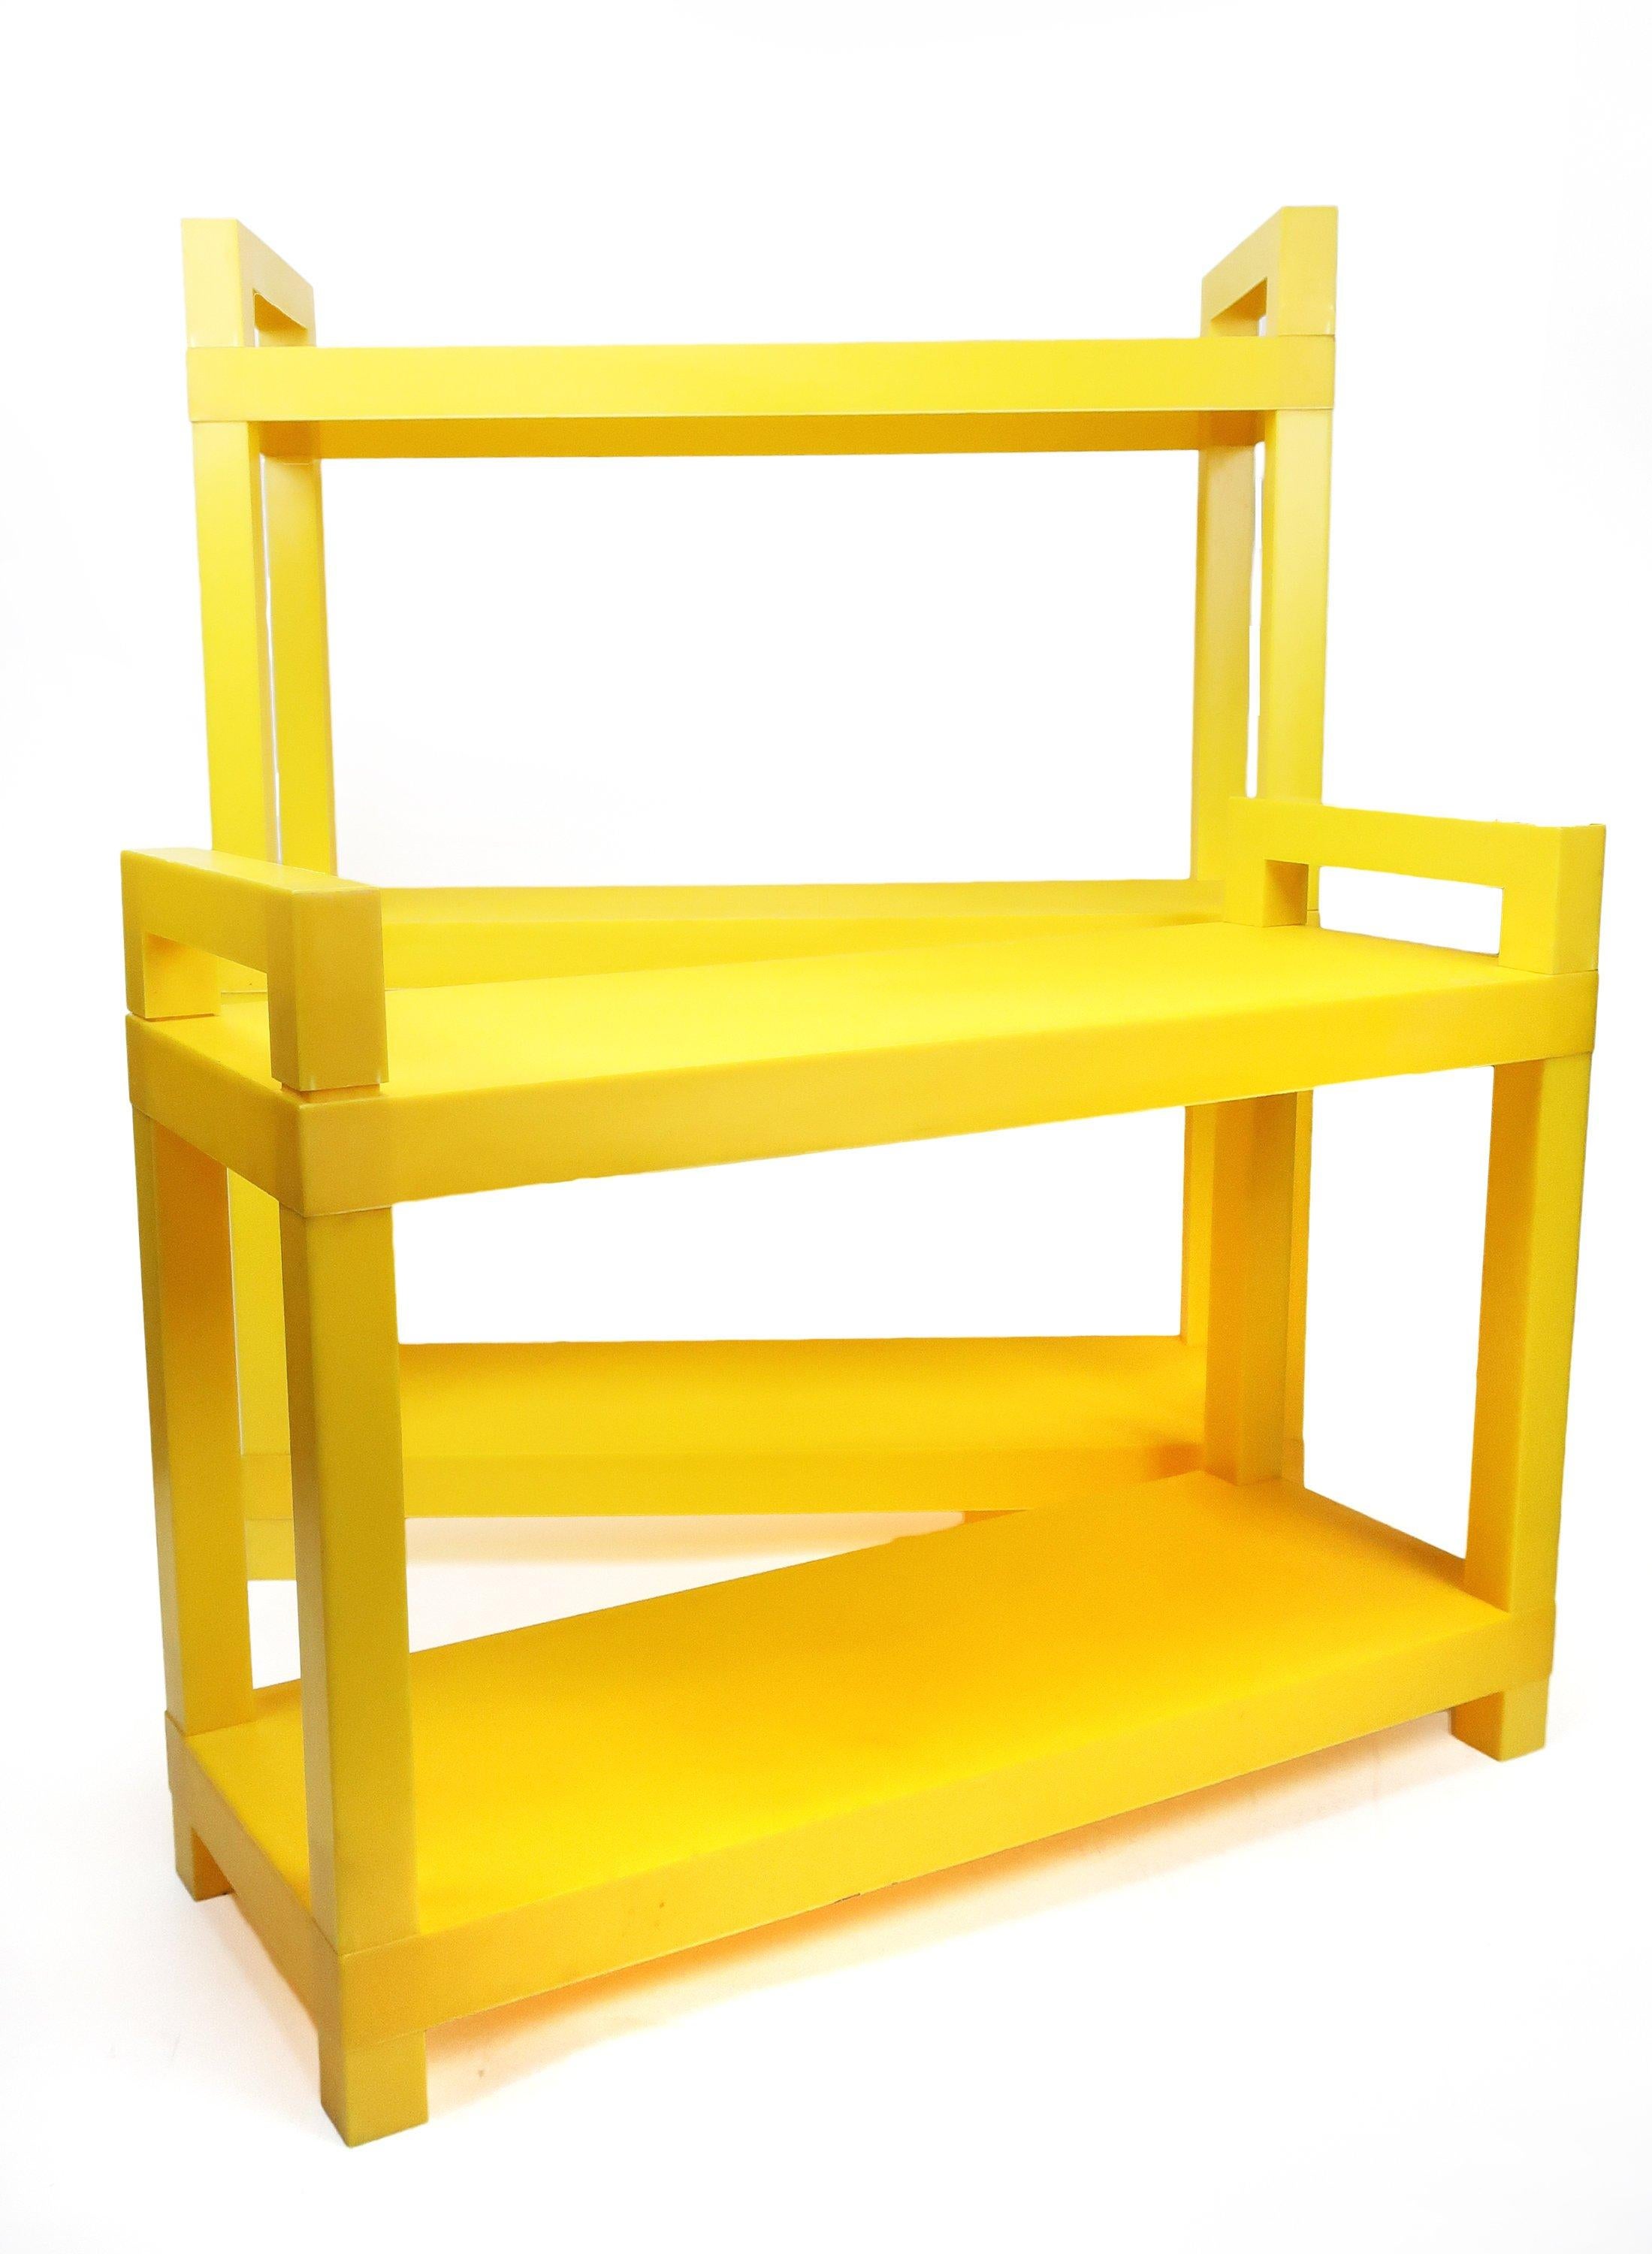 Unknown 1970s Mid-Century Modern Yellow and White Modular Shelving